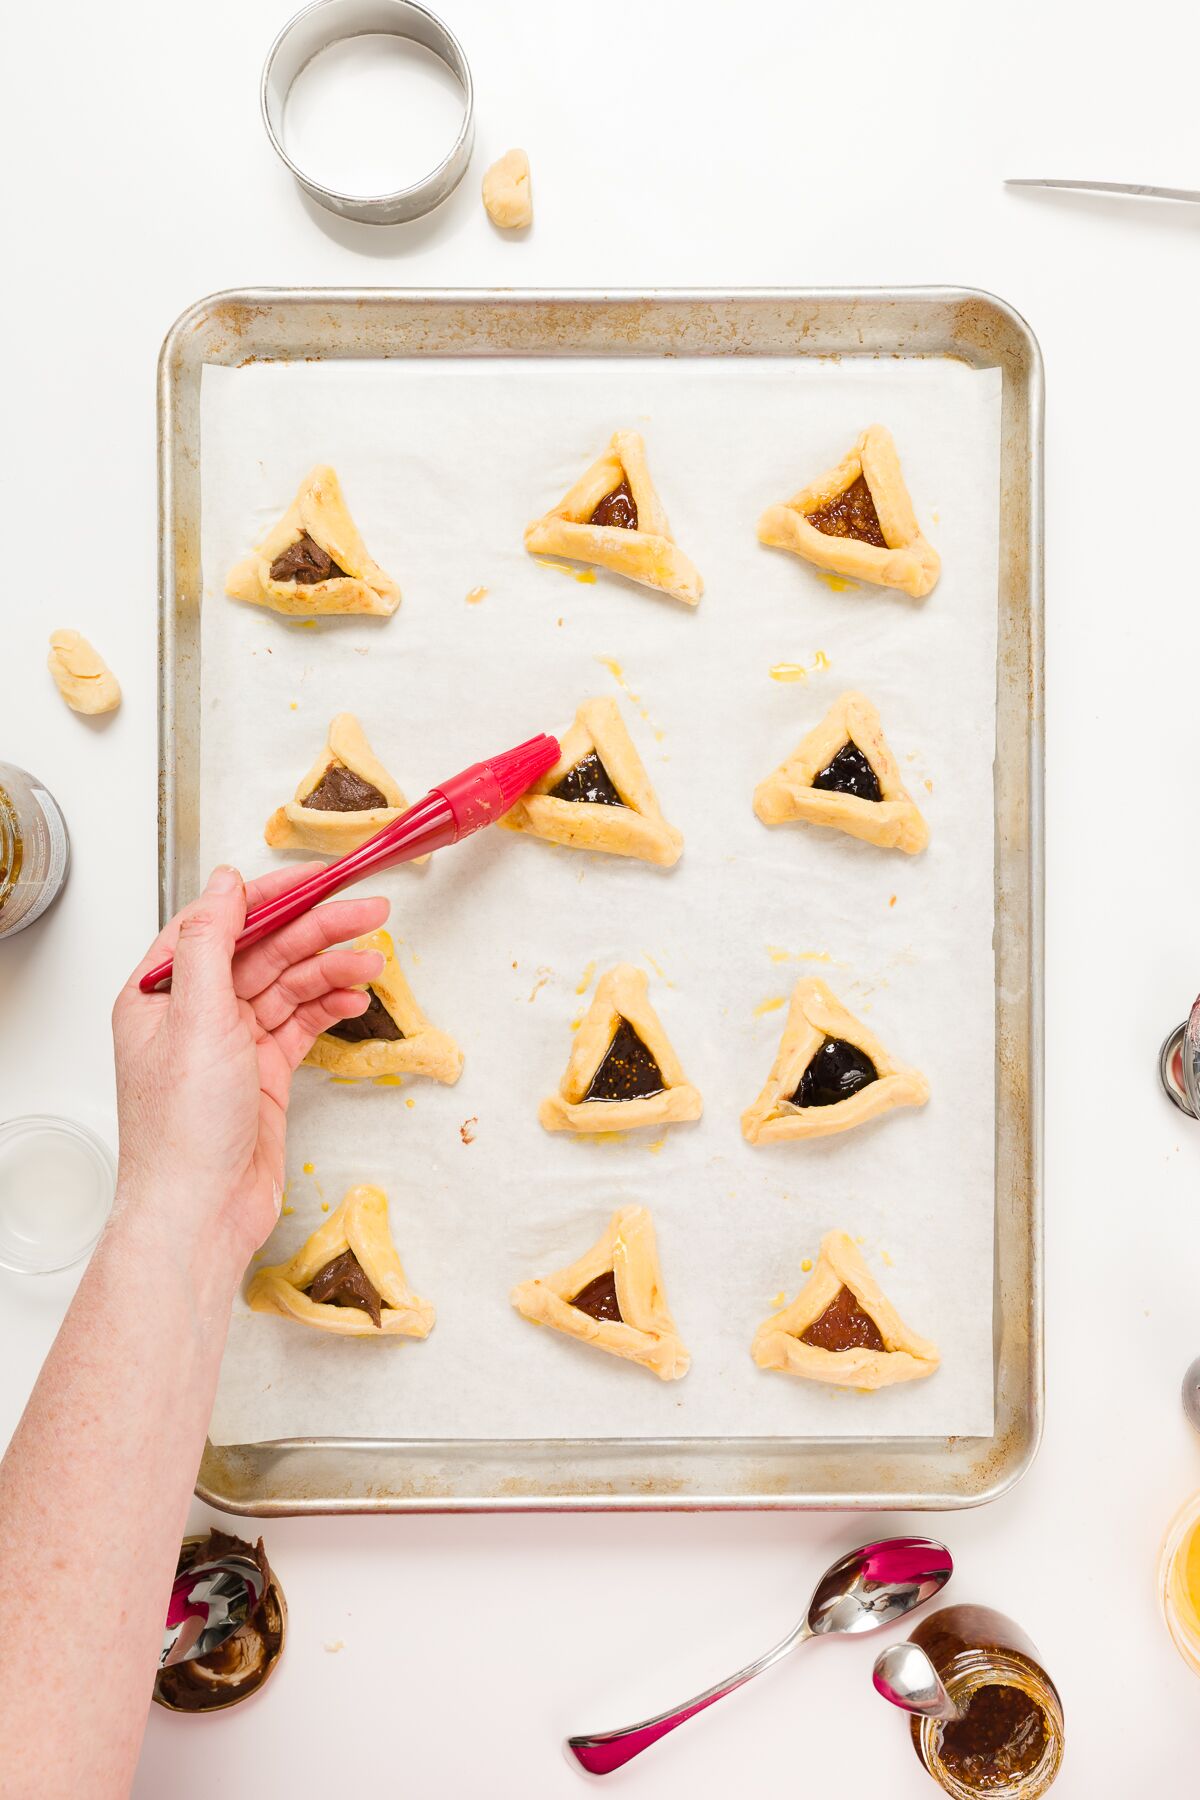 Brushing a trash of hamantaschen with egg